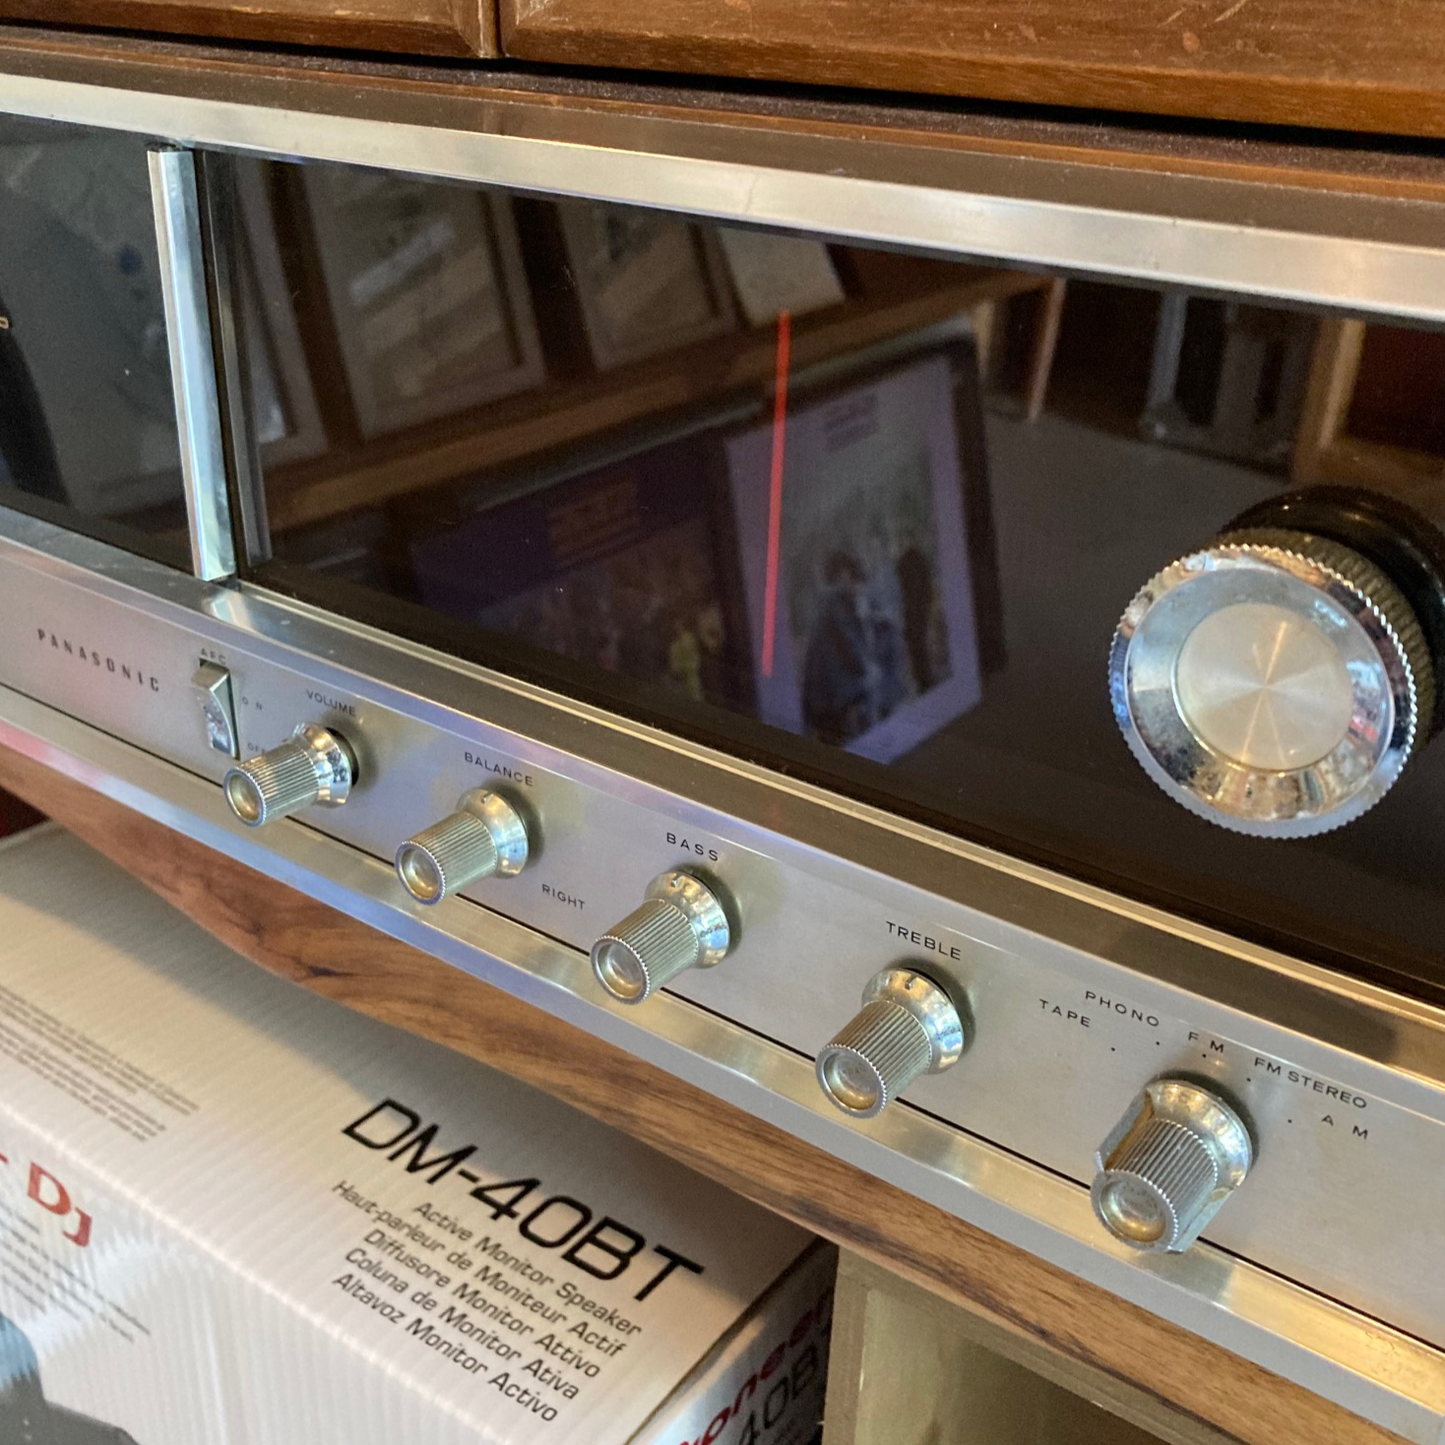 Panasonic 8 track stereo with speakers RE-7070